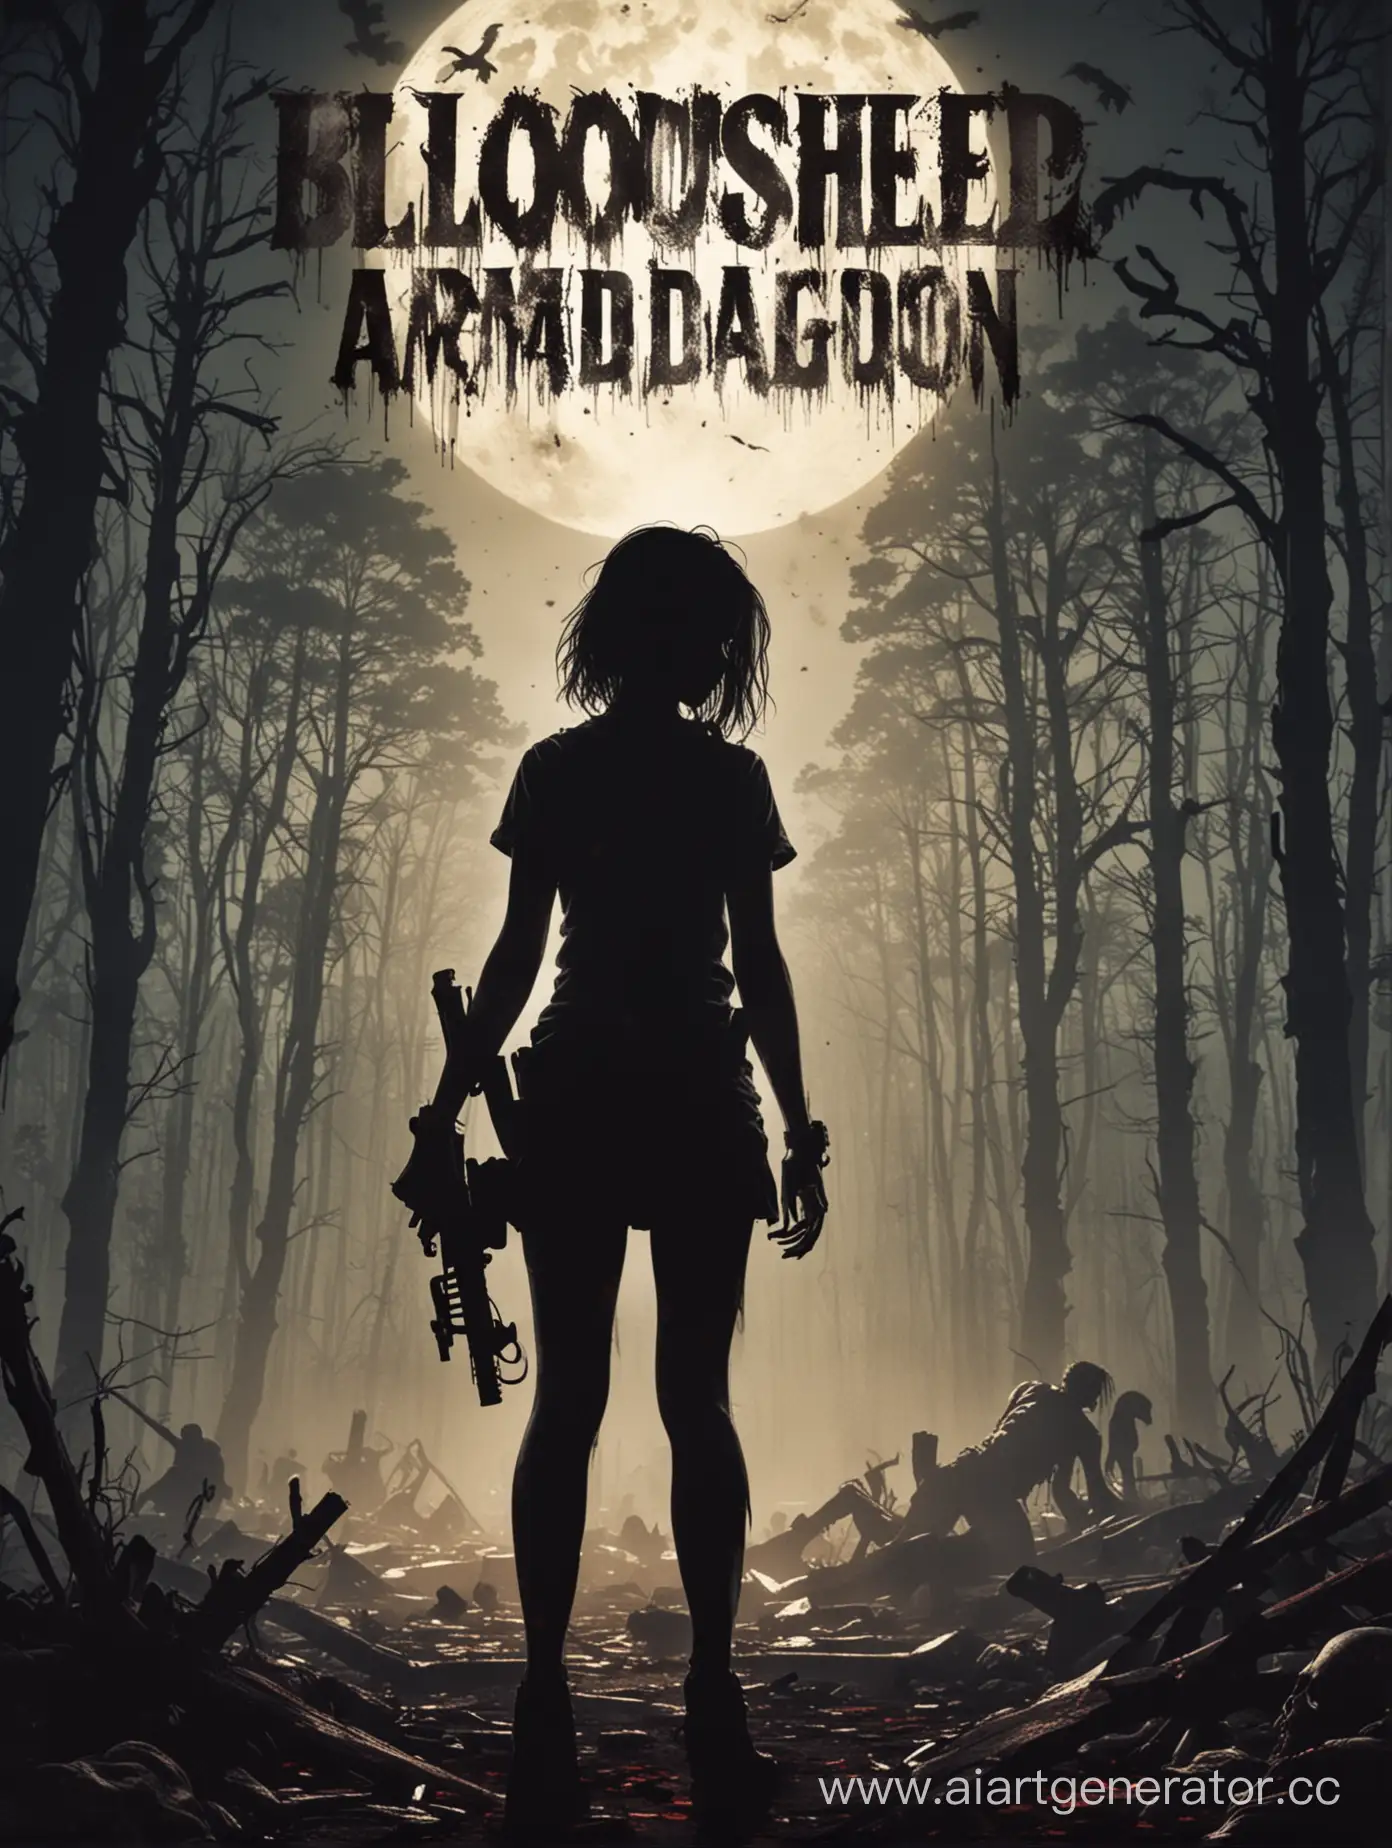 Silhouette-Girl-in-Zombie-Apocalypse-with-Bloodshed-Armageddon